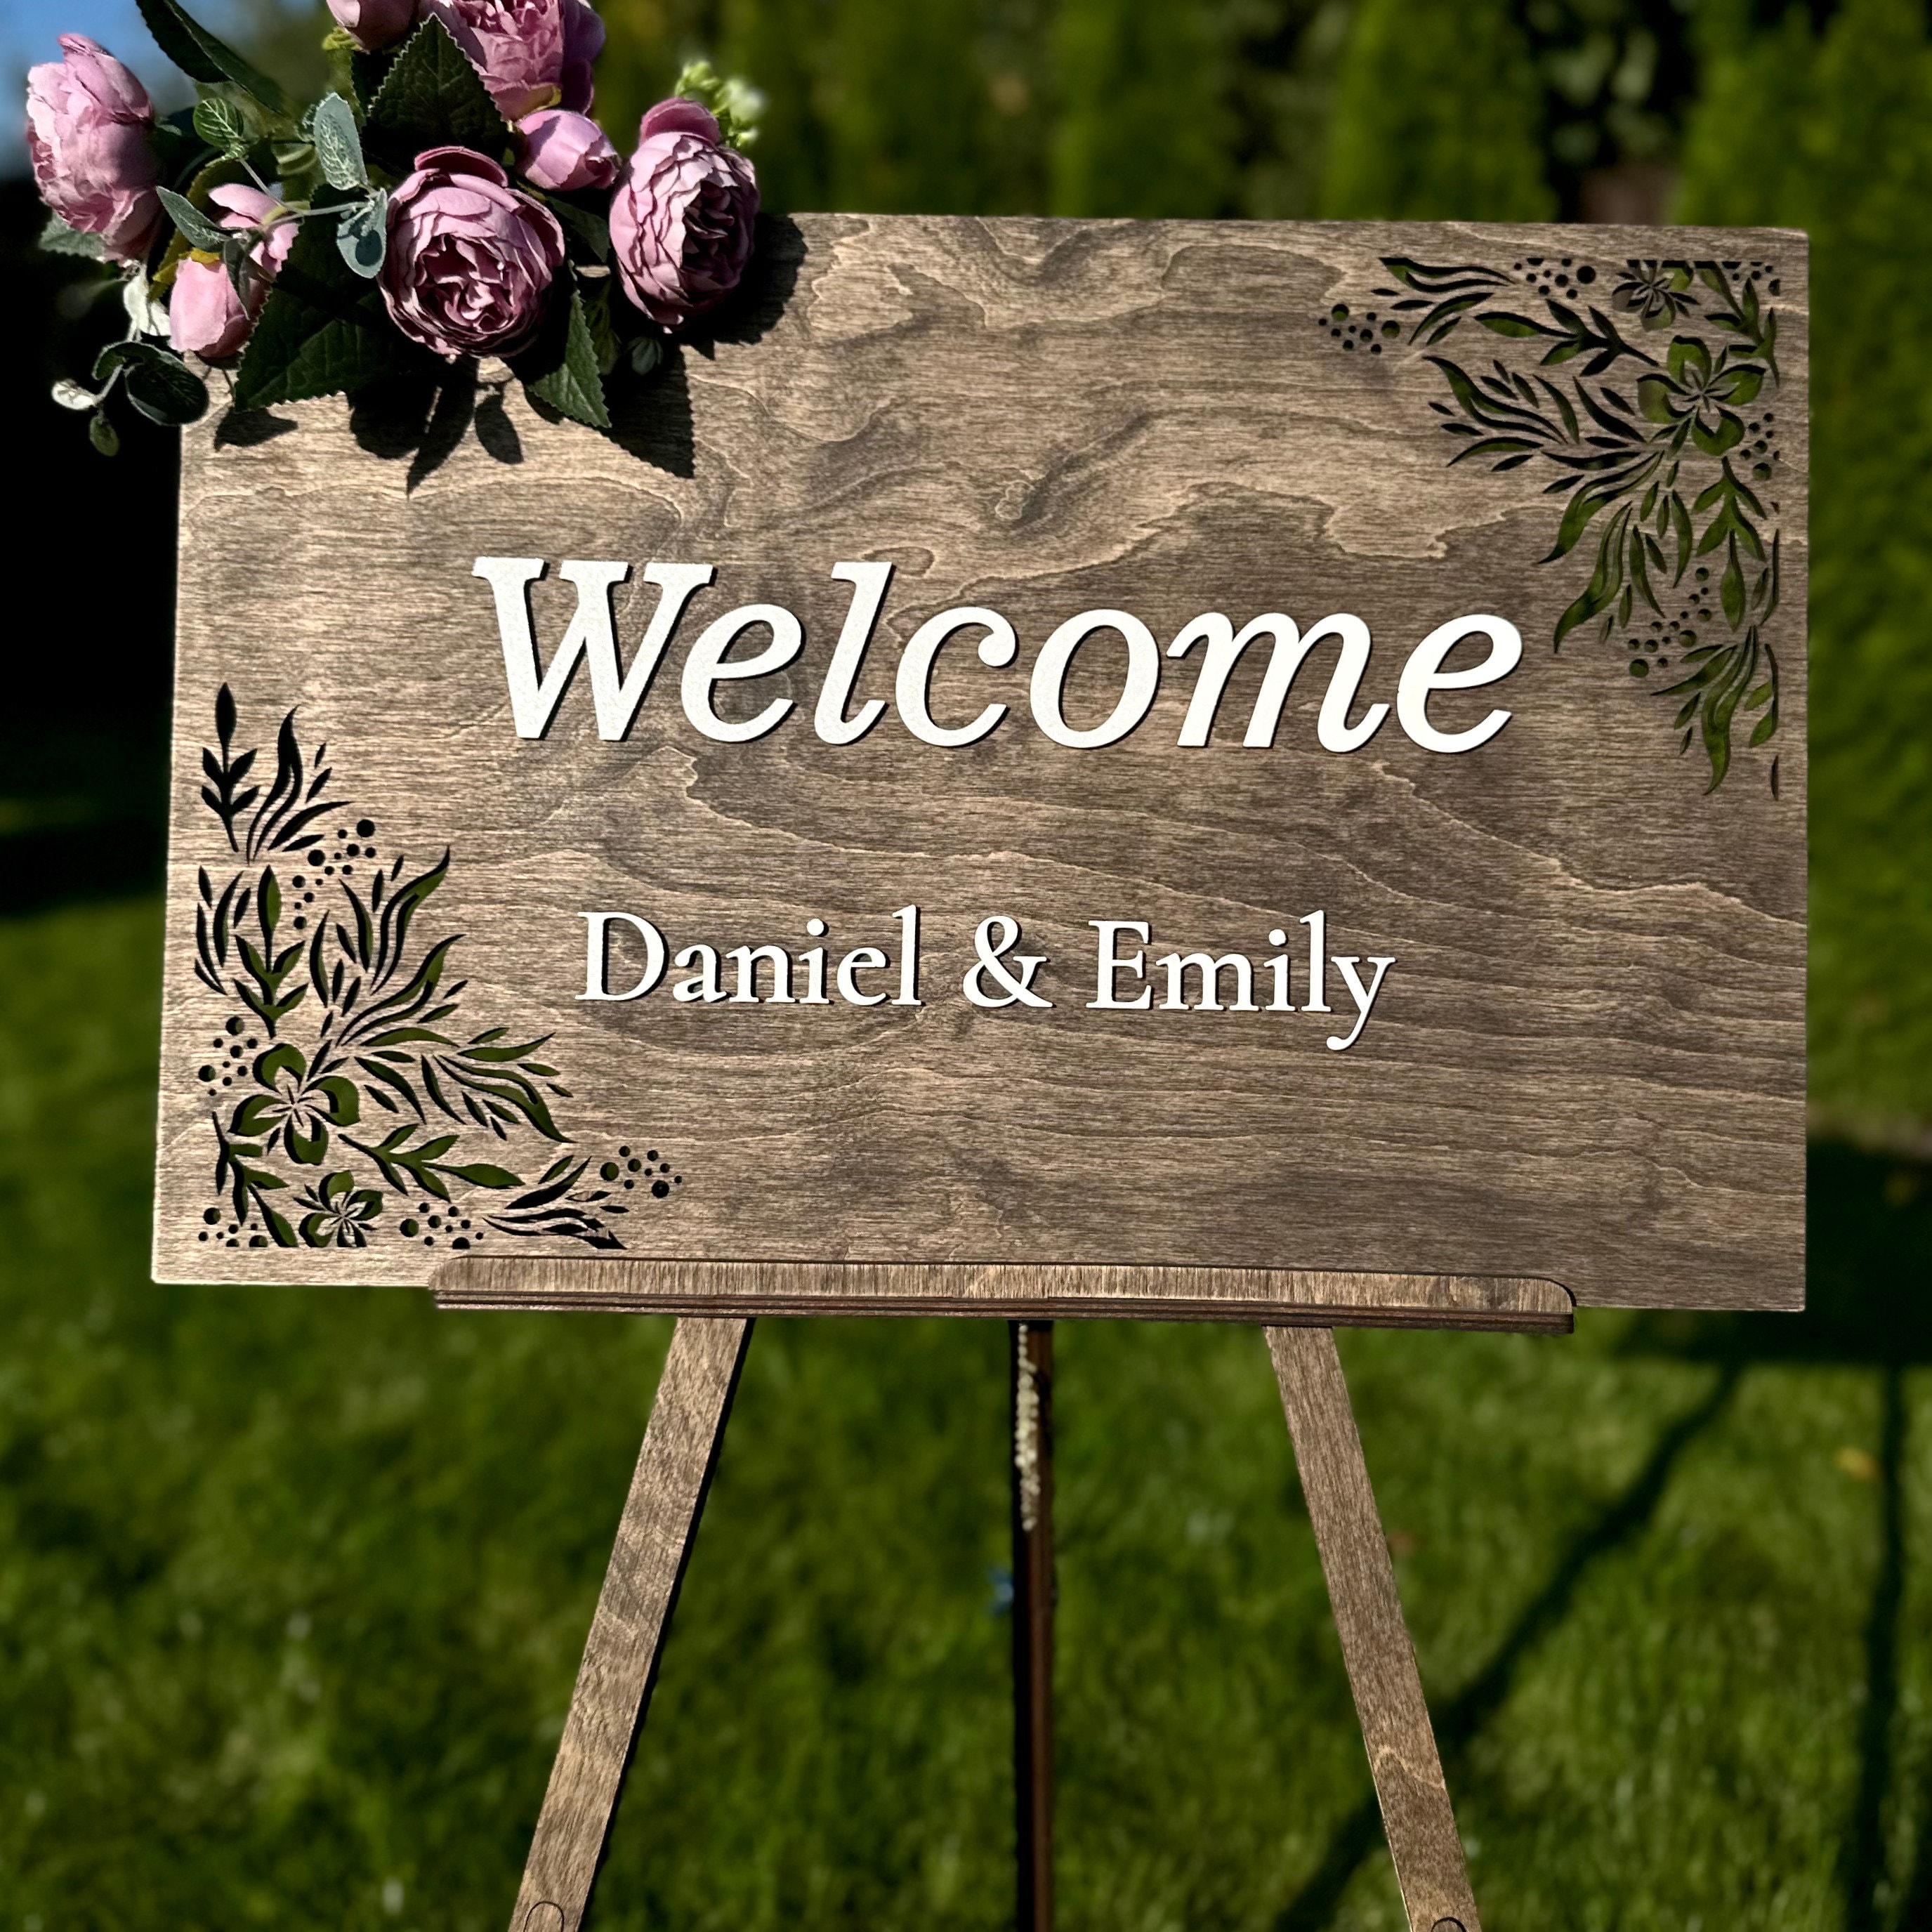  Wedding Wood Easel Stand, Photo Picture Wooden Easel Stand  Backs, Boho Rustic Wedding Decor, Large Wedding Sign Stand, Easel Display  Stand : Handmade Products